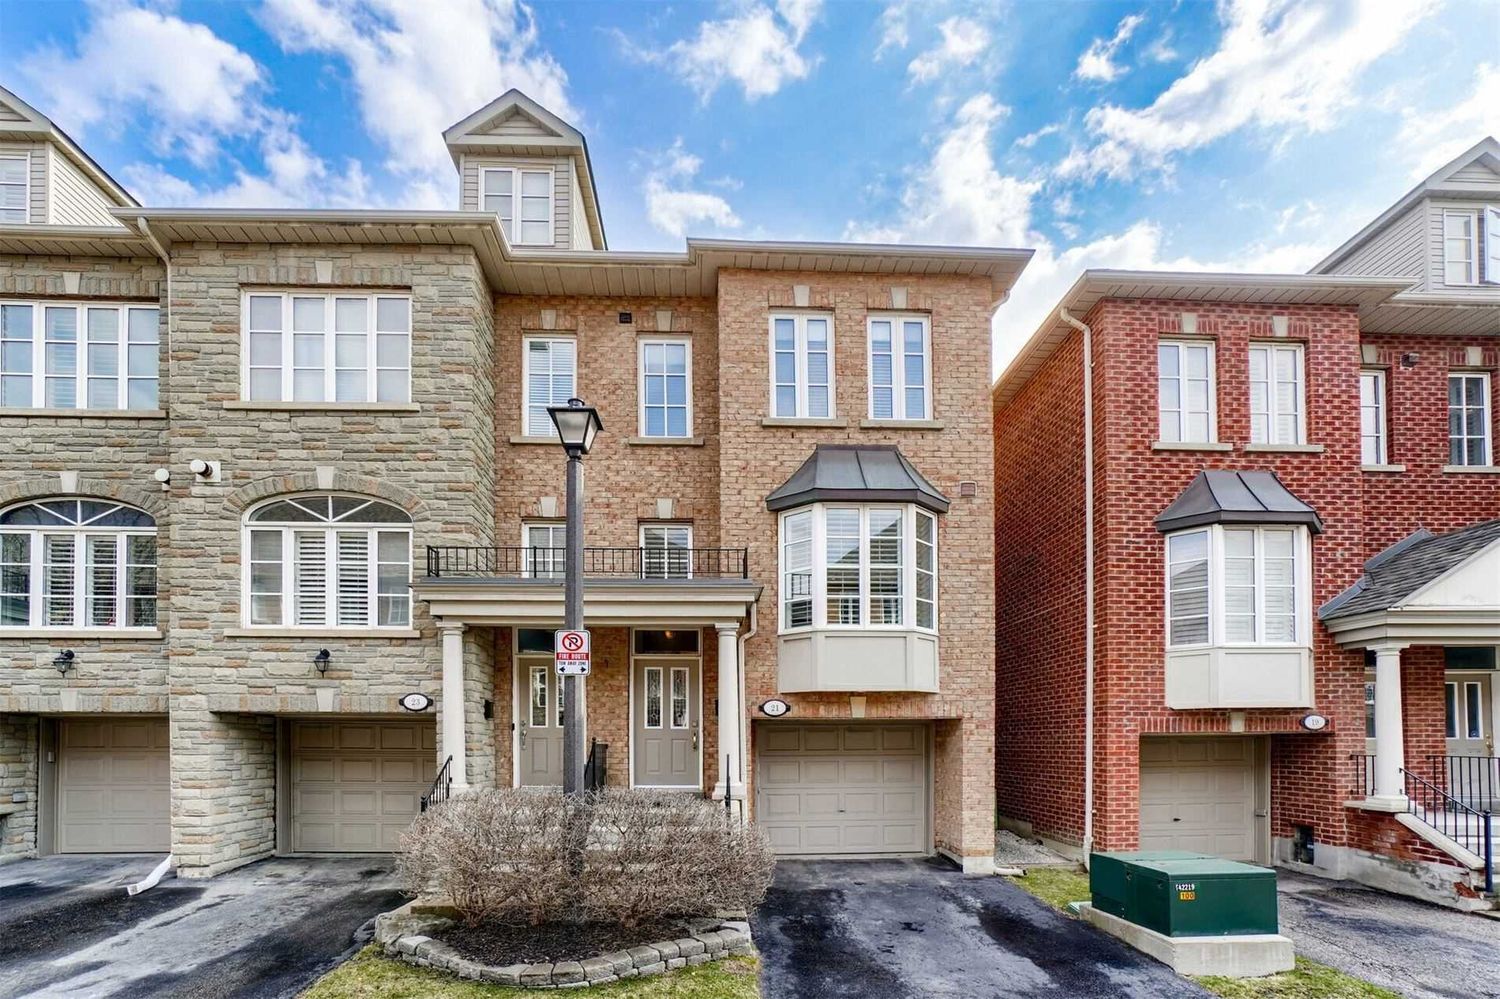 112-116 Evans Avenue. Oxford Court Townhouses is located in  Etobicoke, Toronto - image #2 of 2